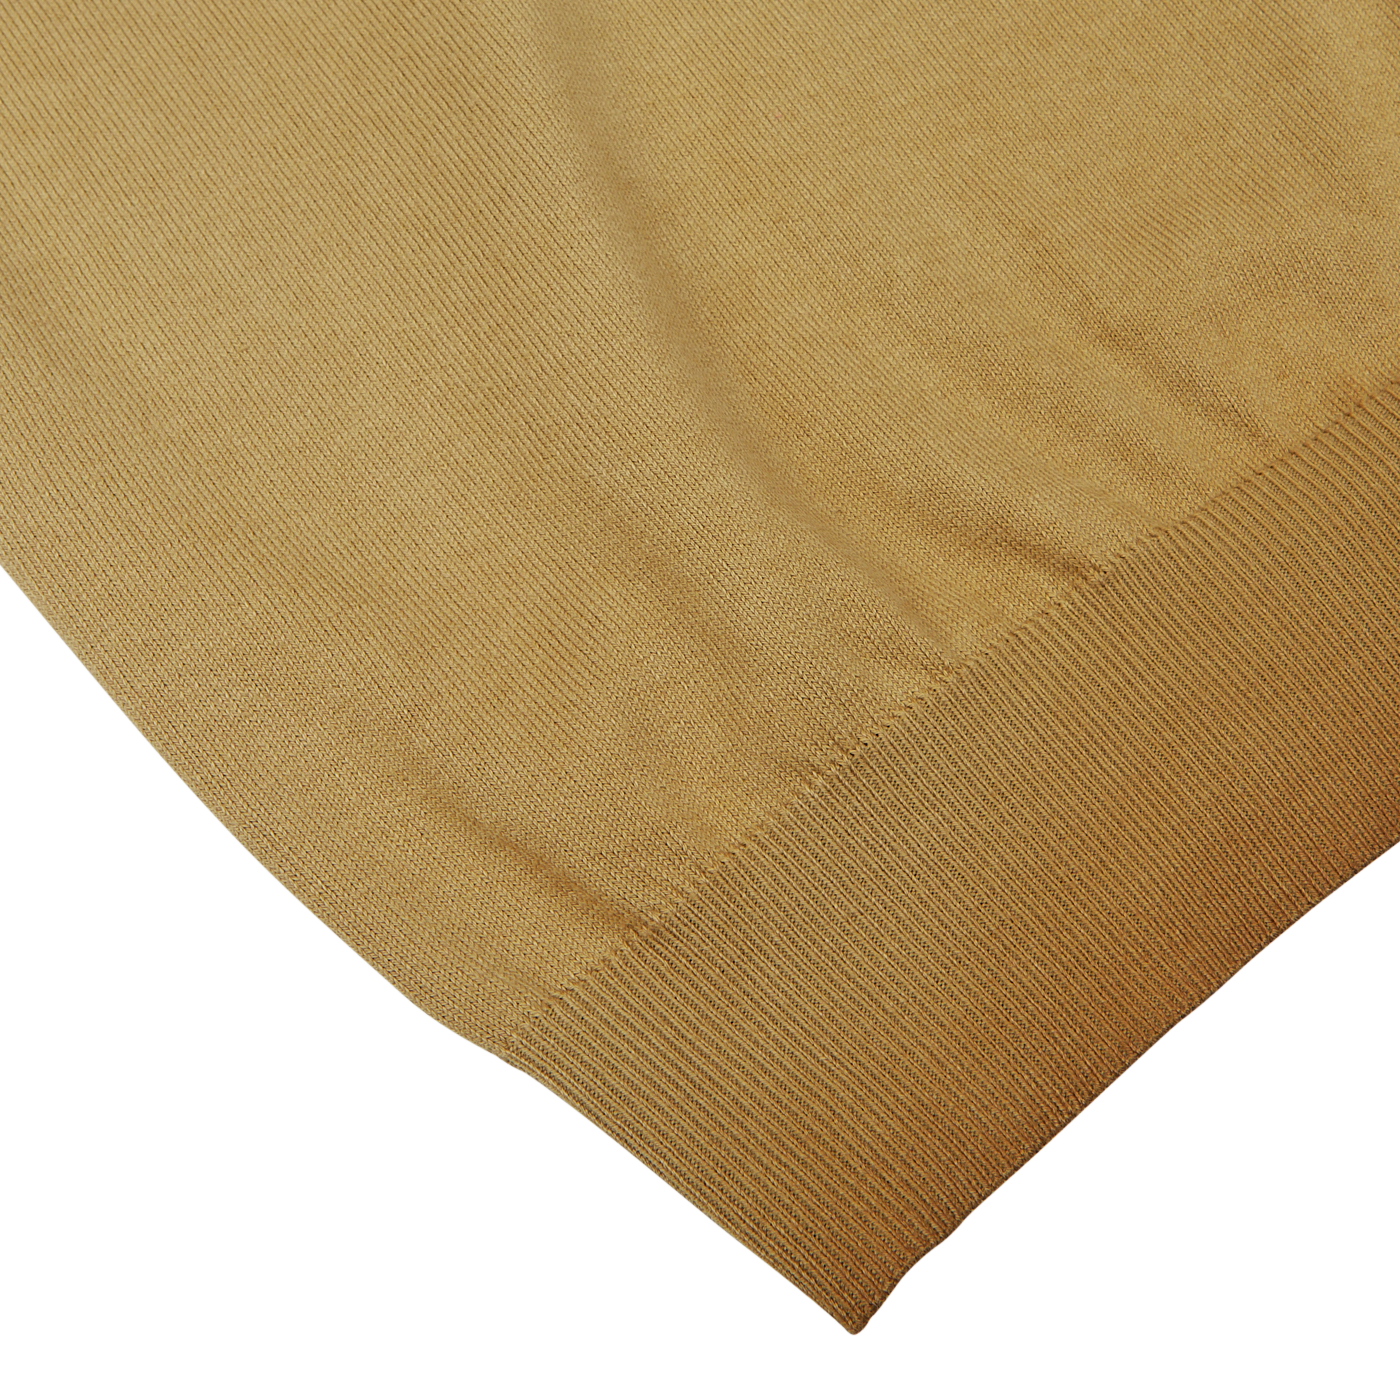 Close-up of Altea's light brown dyed cotton Capri collar polo shirt with a fine texture and neatly hemmed edge on a white background.